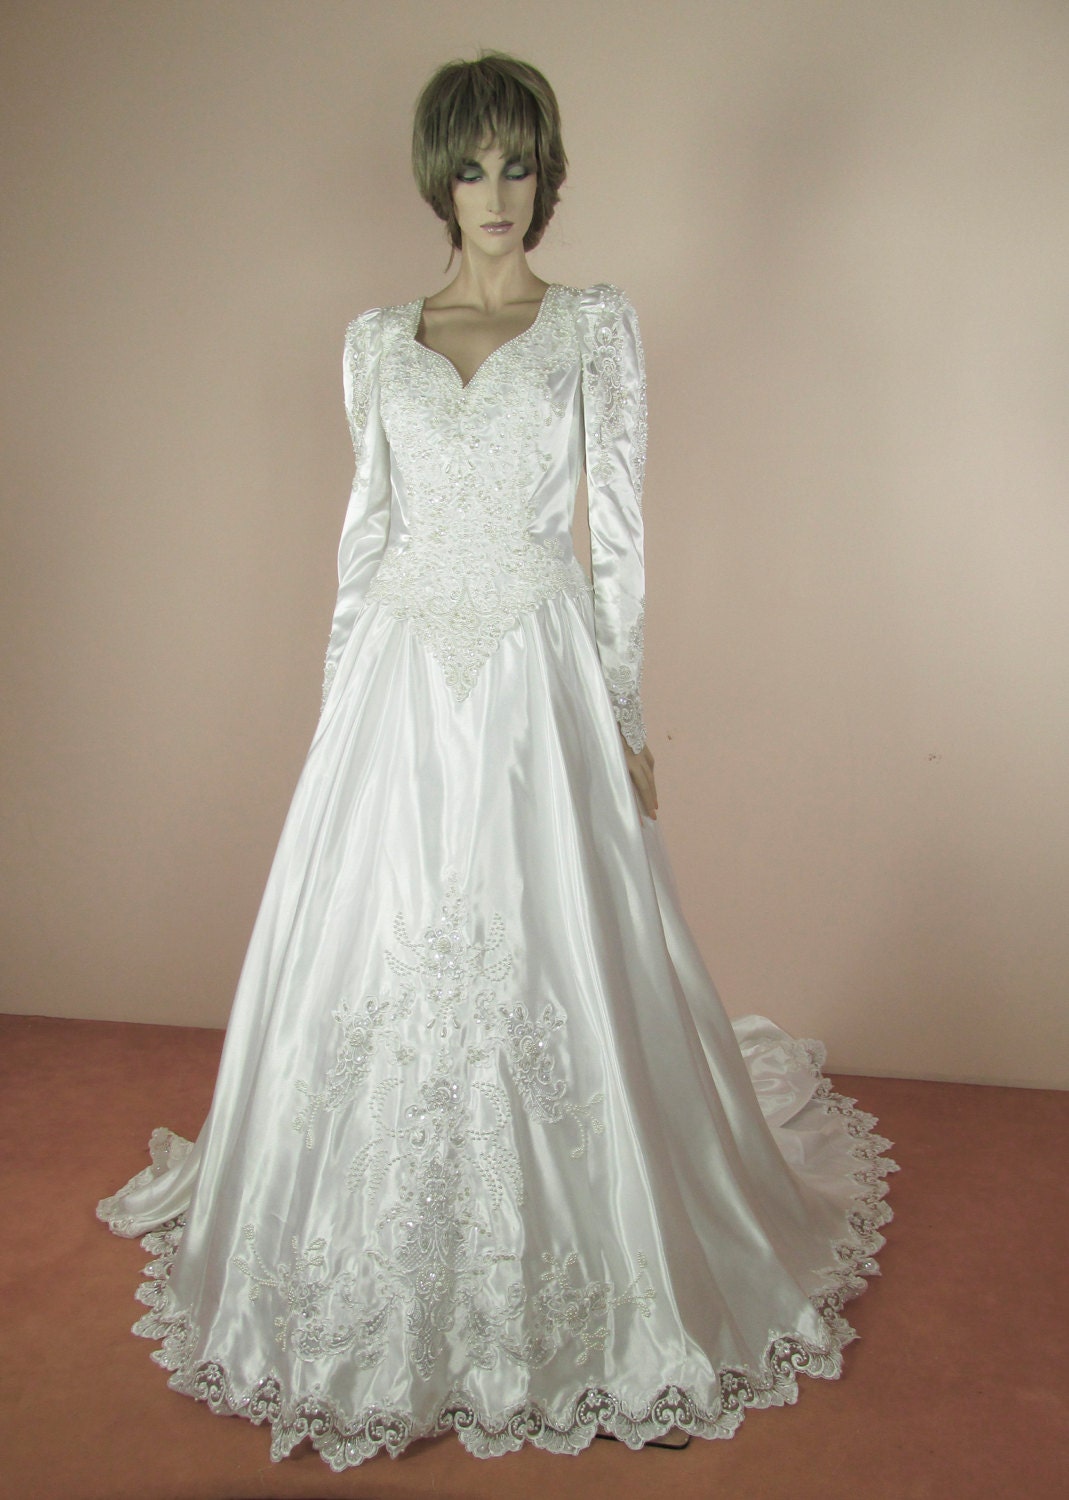 White Wedding Dress 80s Vintage bridal gown from 1980s